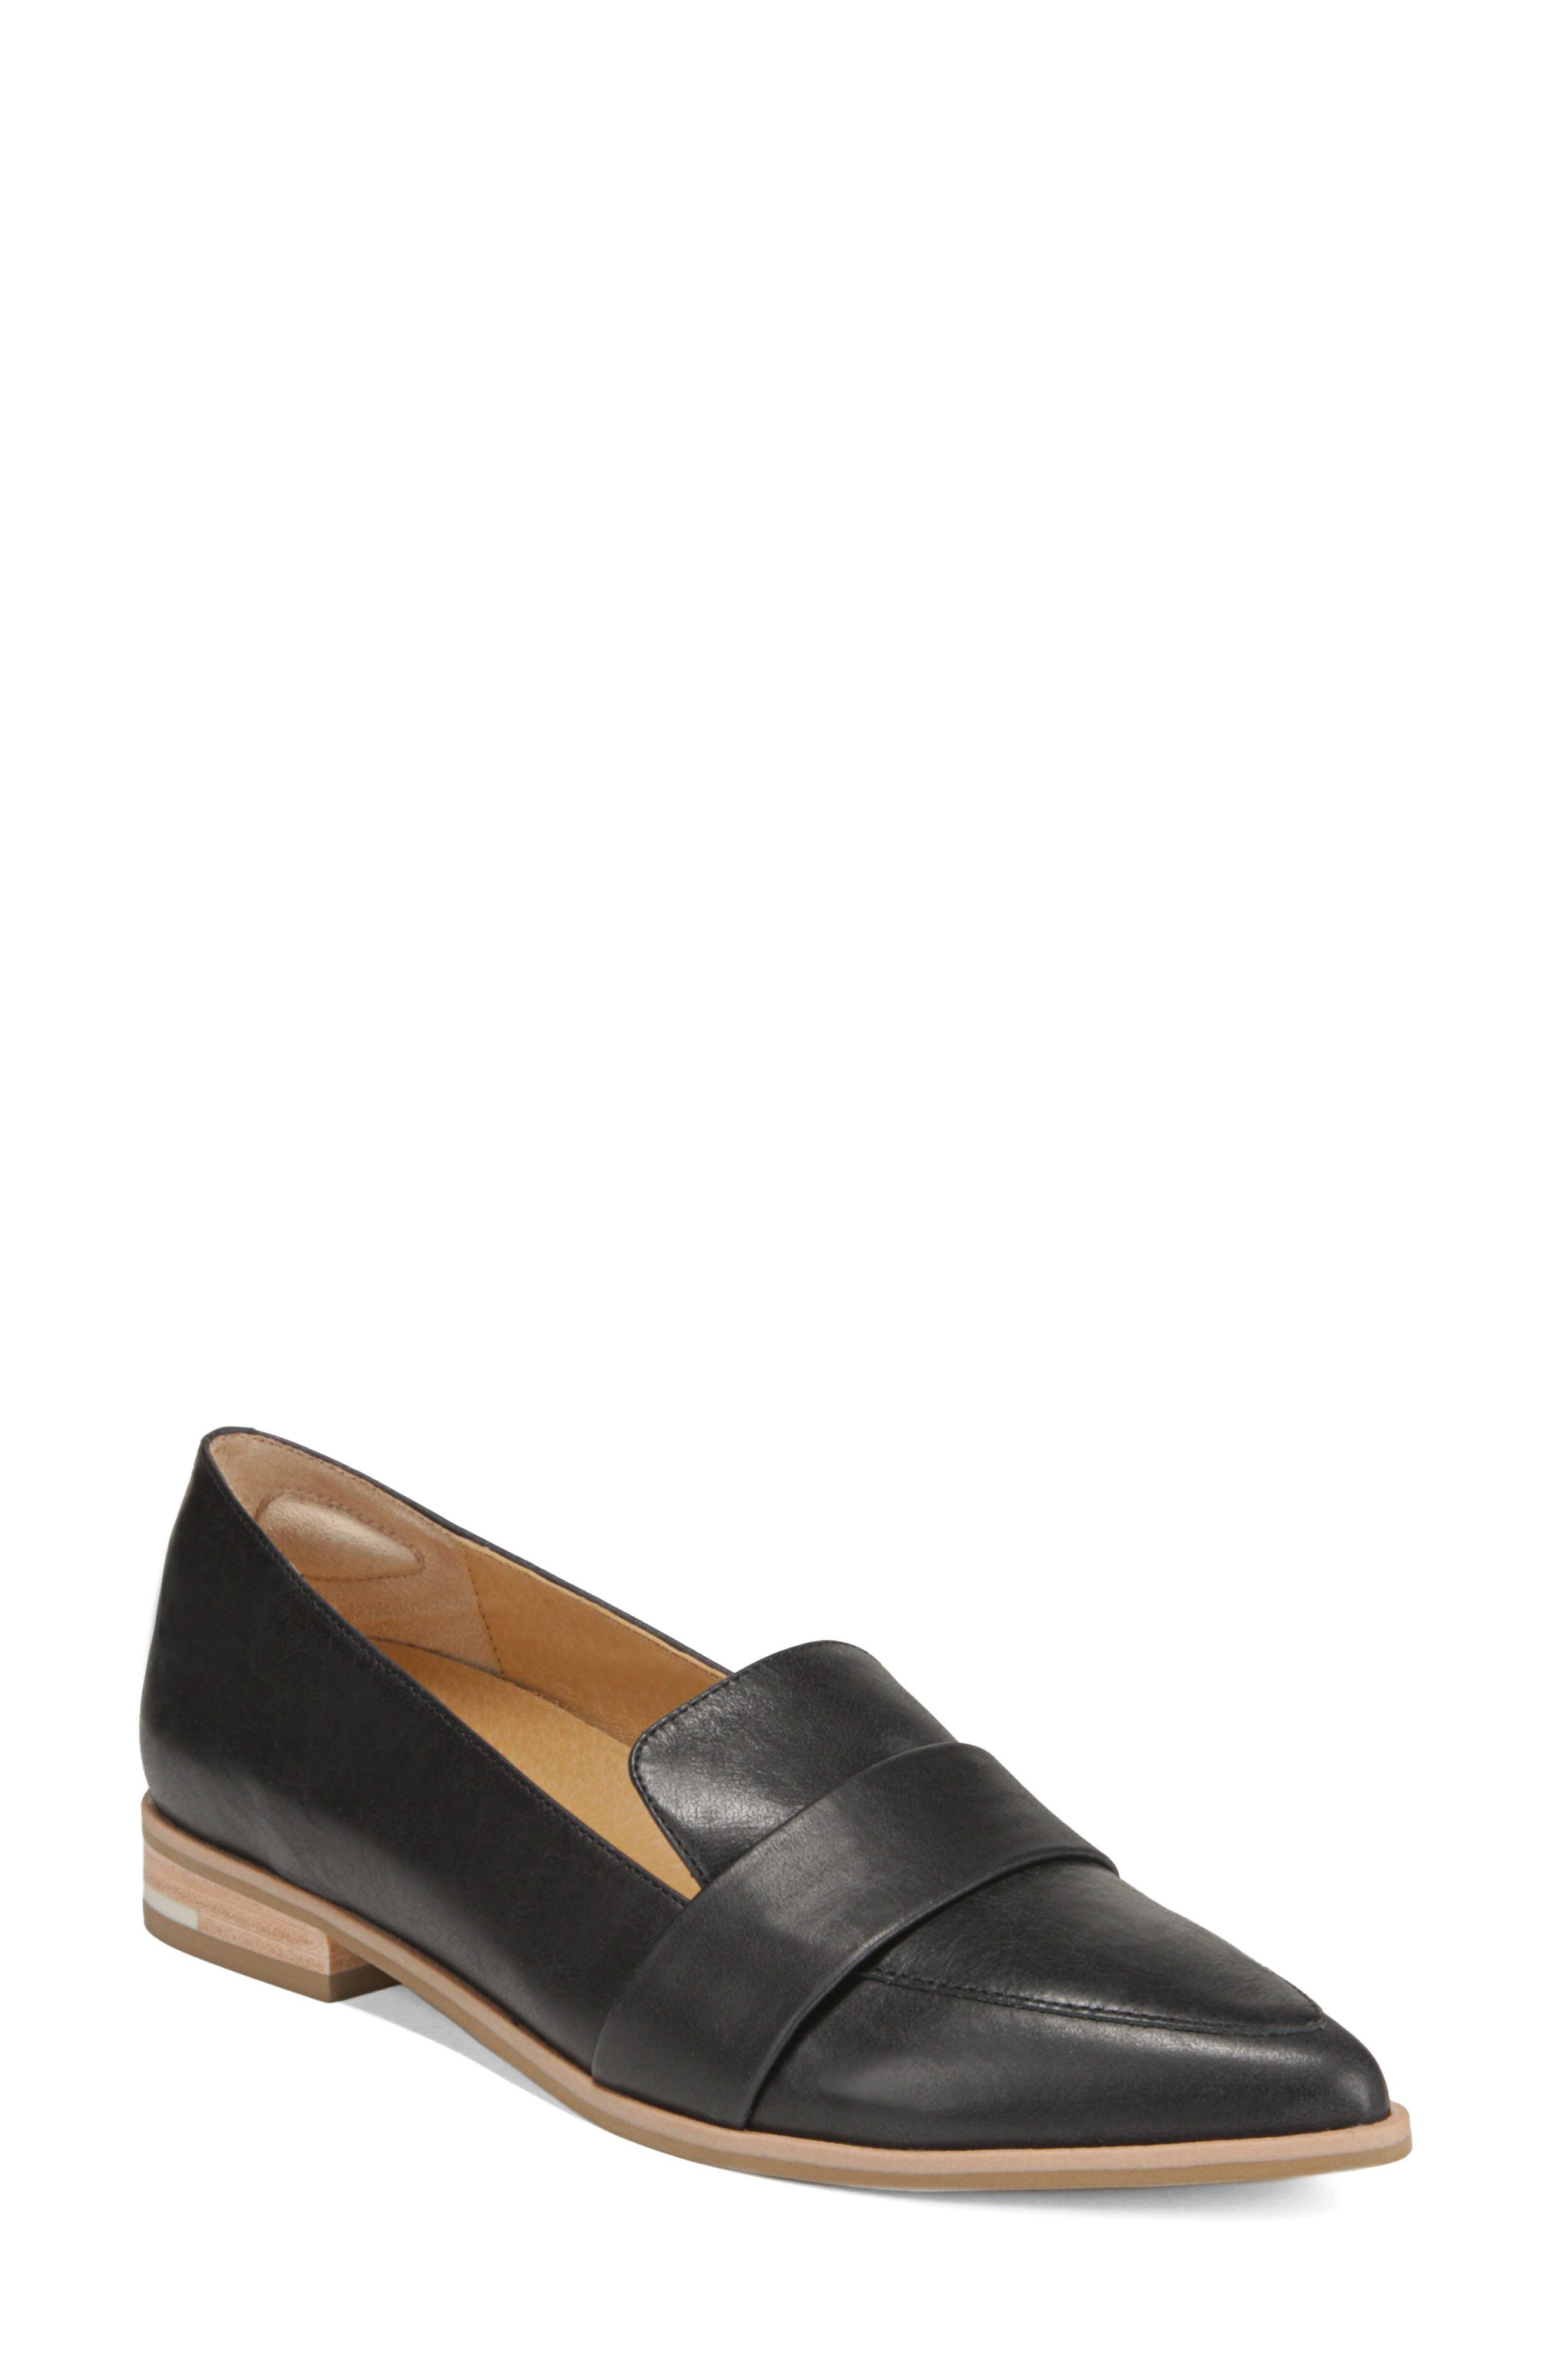 dr scholl's leather loafers